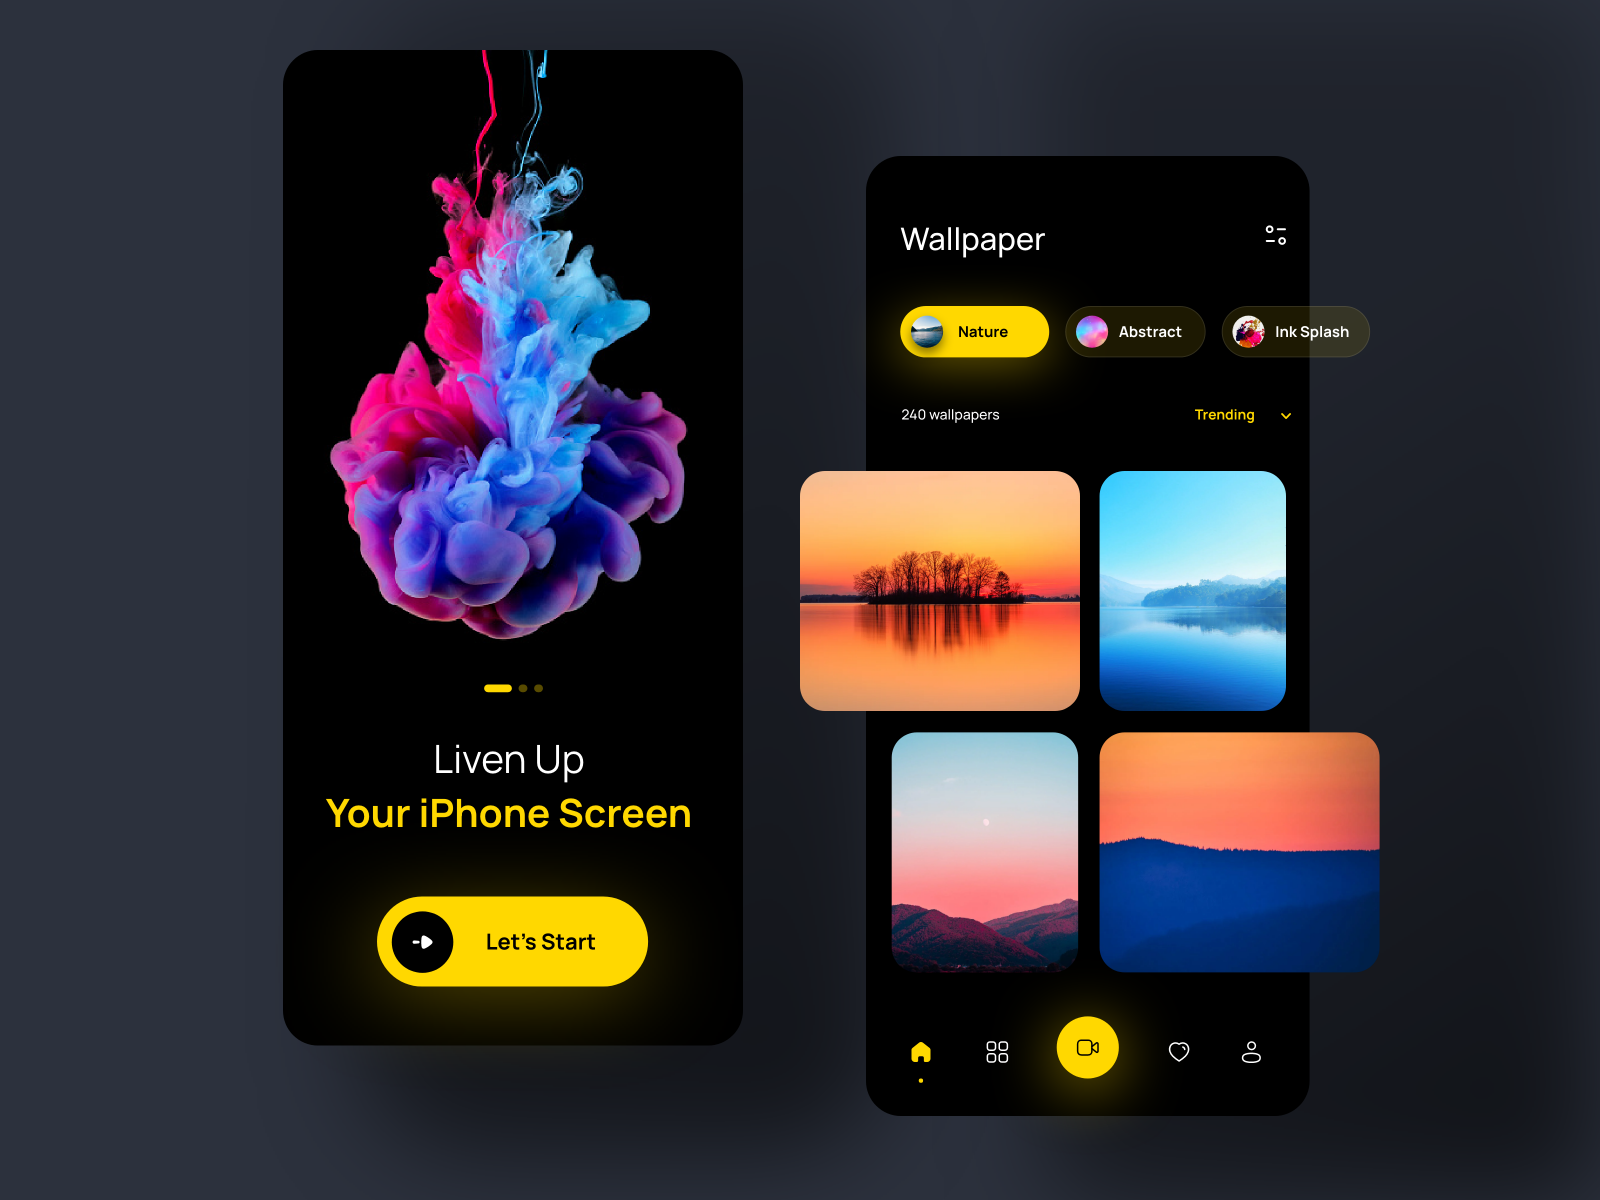 10 Best Live Wallpaper Apps For iPhone in 2023 ( FREE )